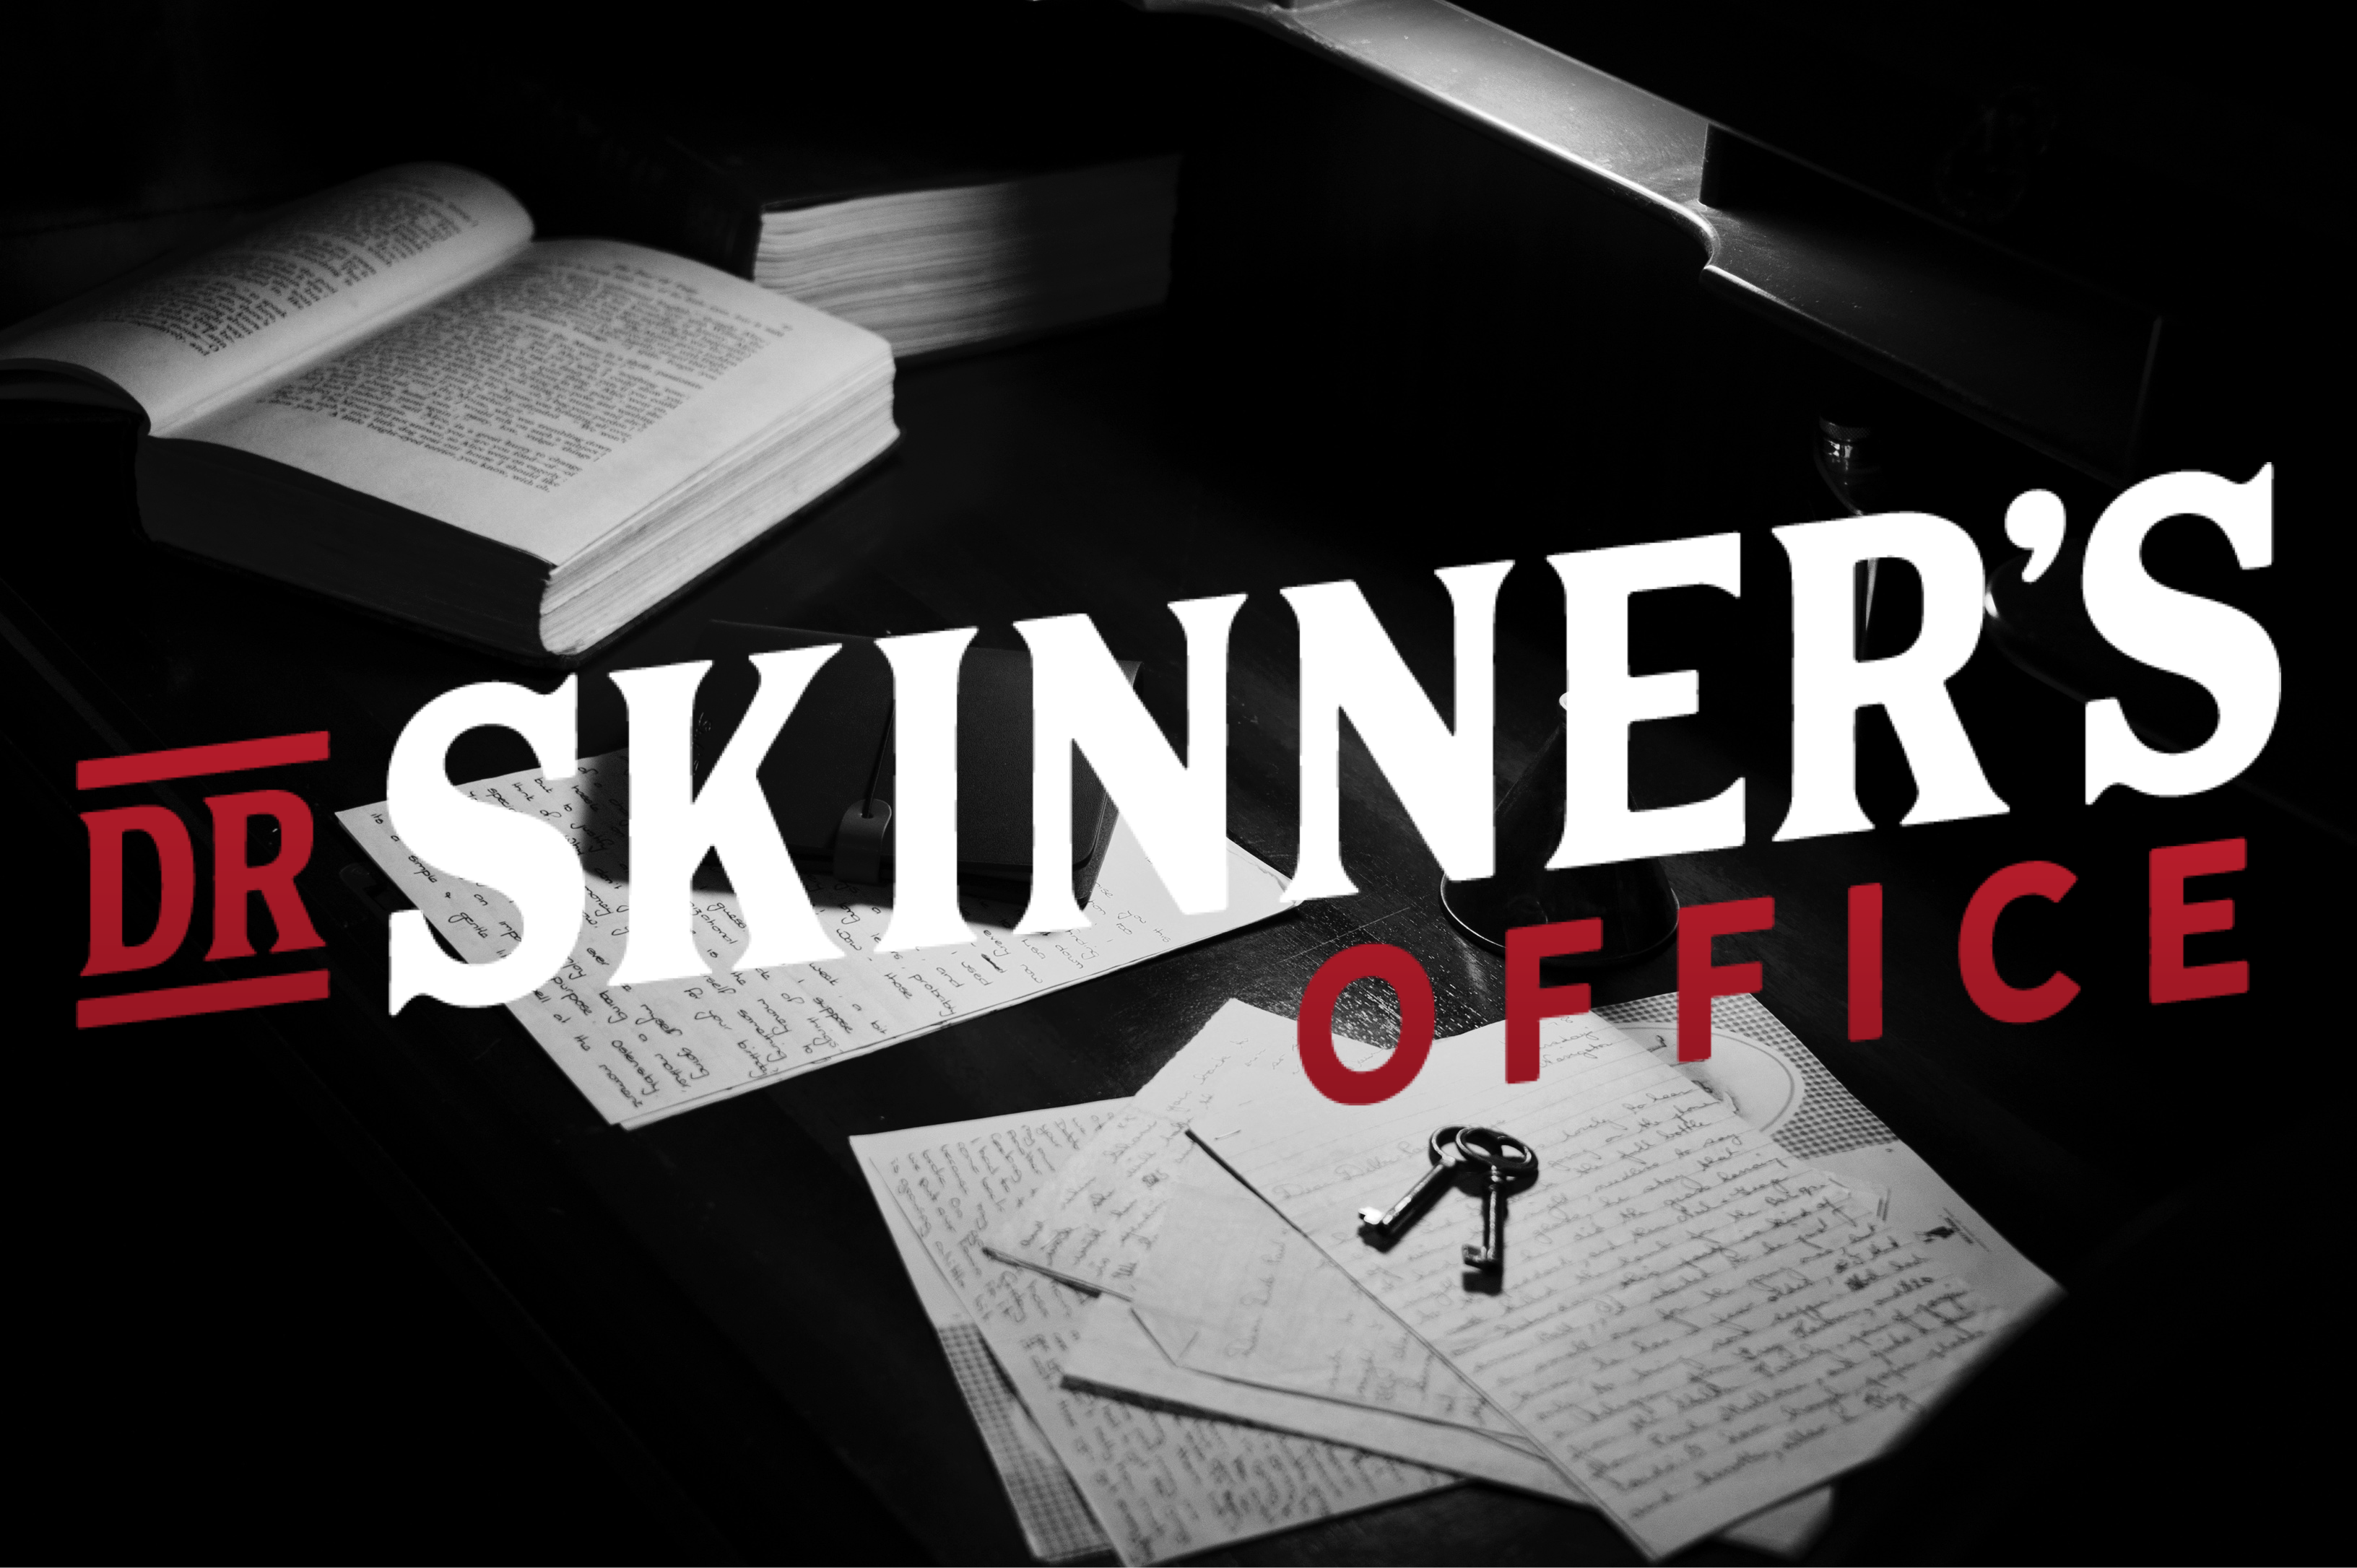 Dr Skinners Office